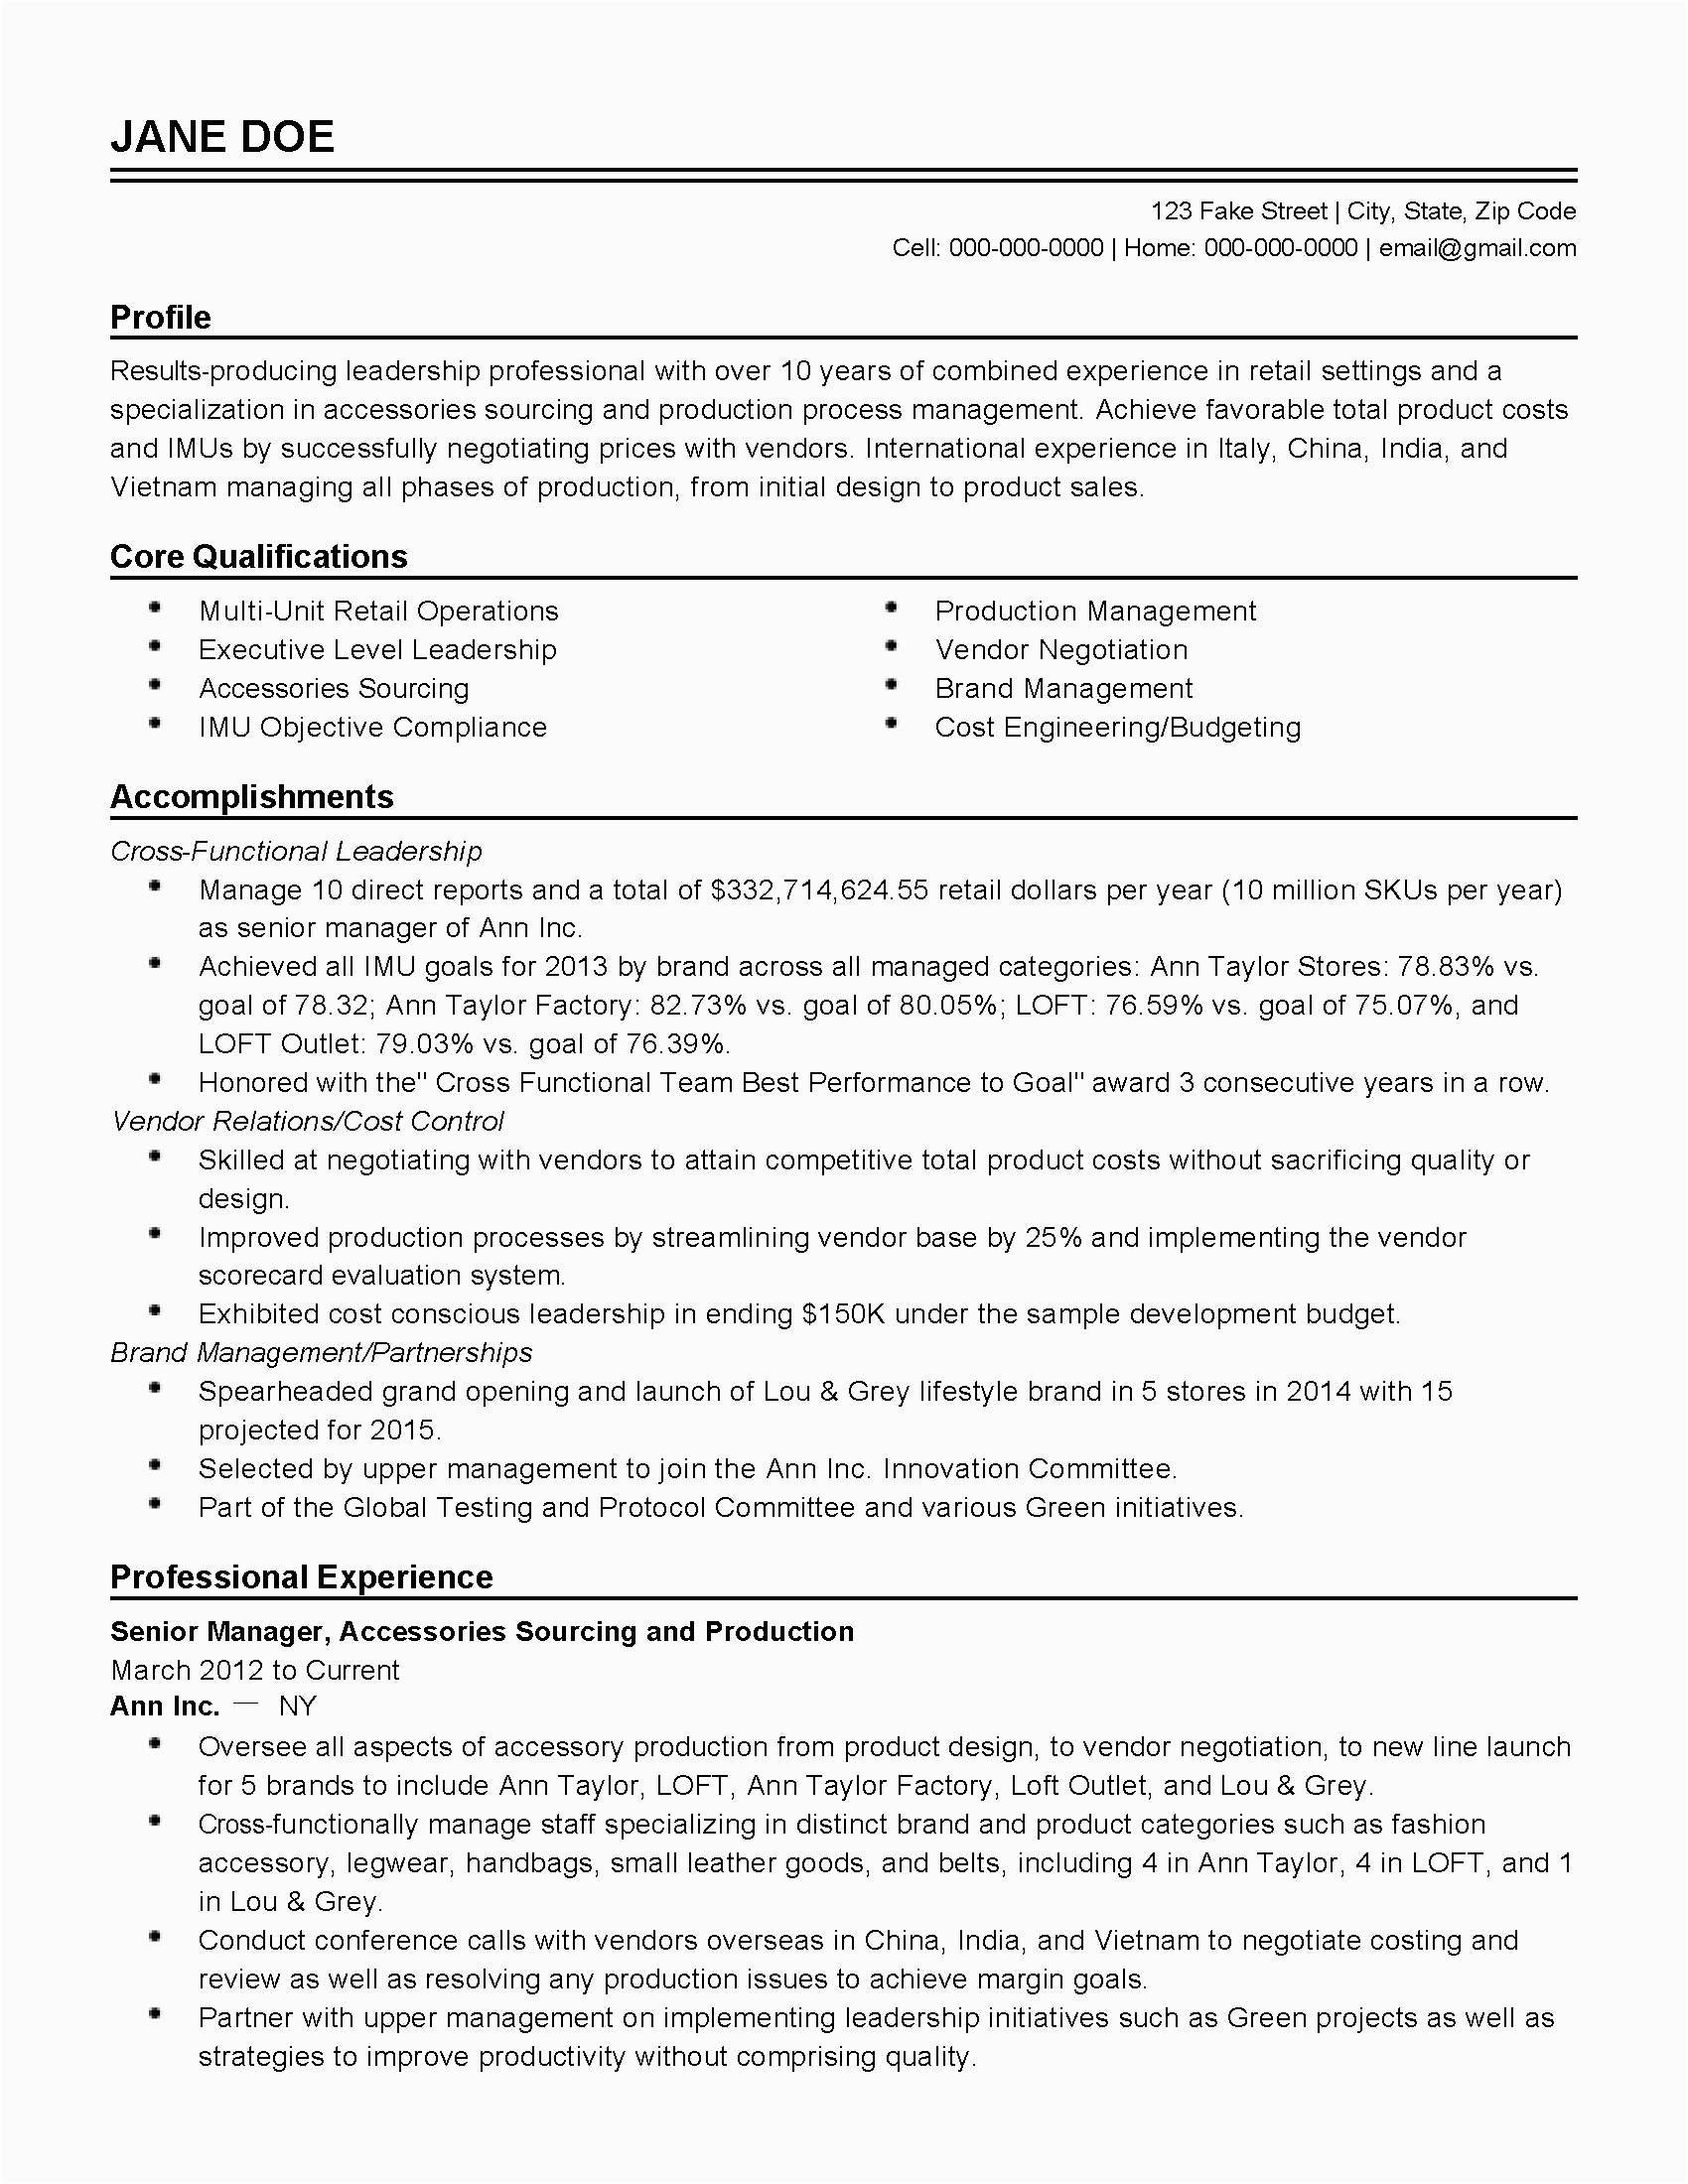 Hr Resume Sample for 10 Years Experience Resume format 10 Years Experience Resume Templates